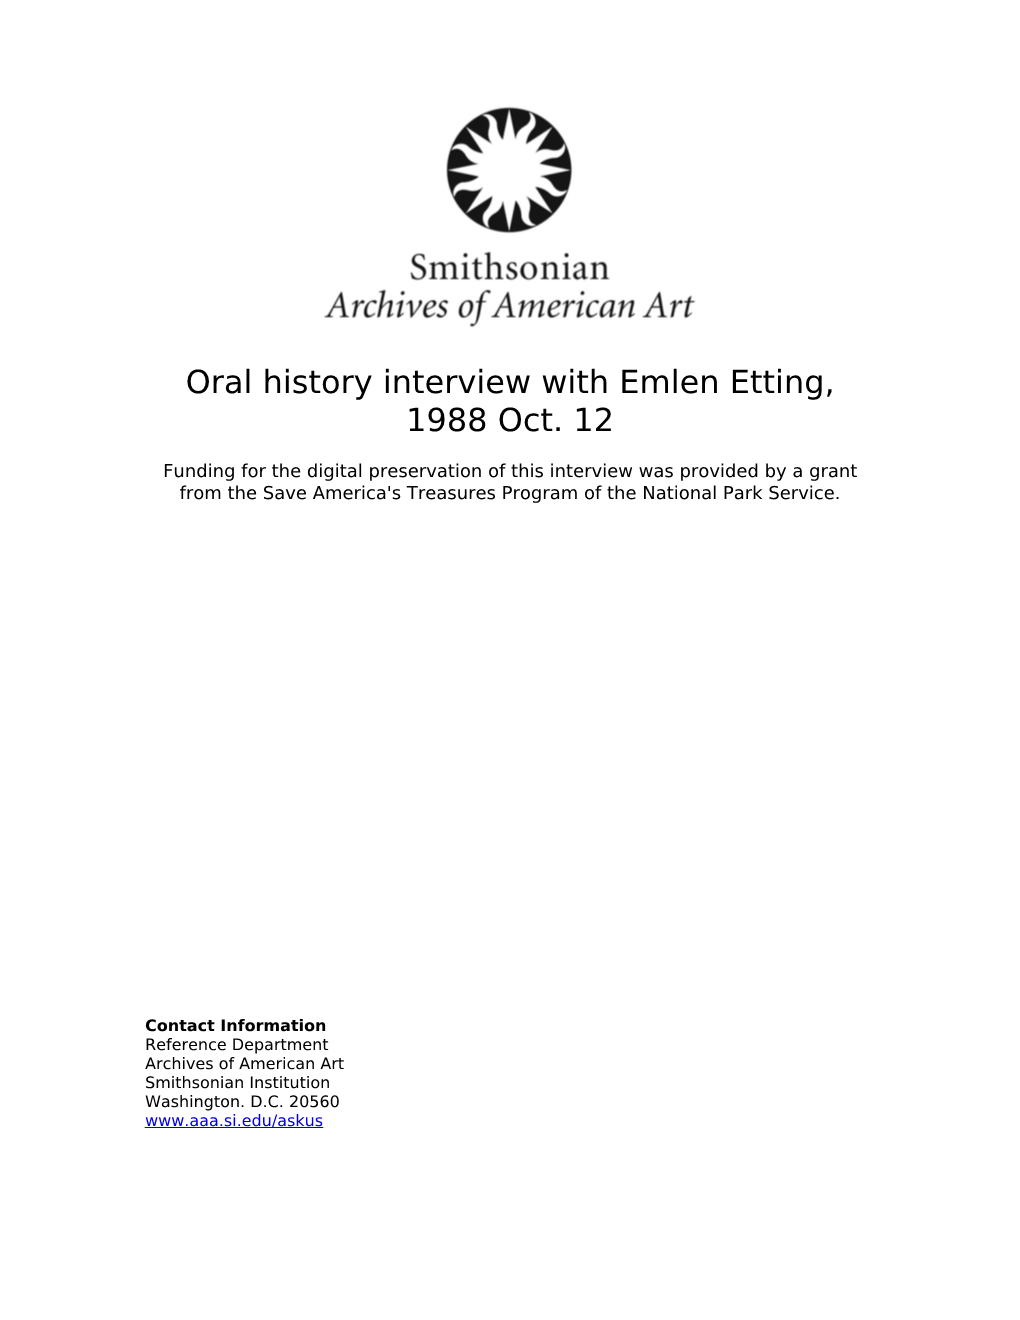 Oral History Interview with Emlen Etting, 1988 Oct. 12